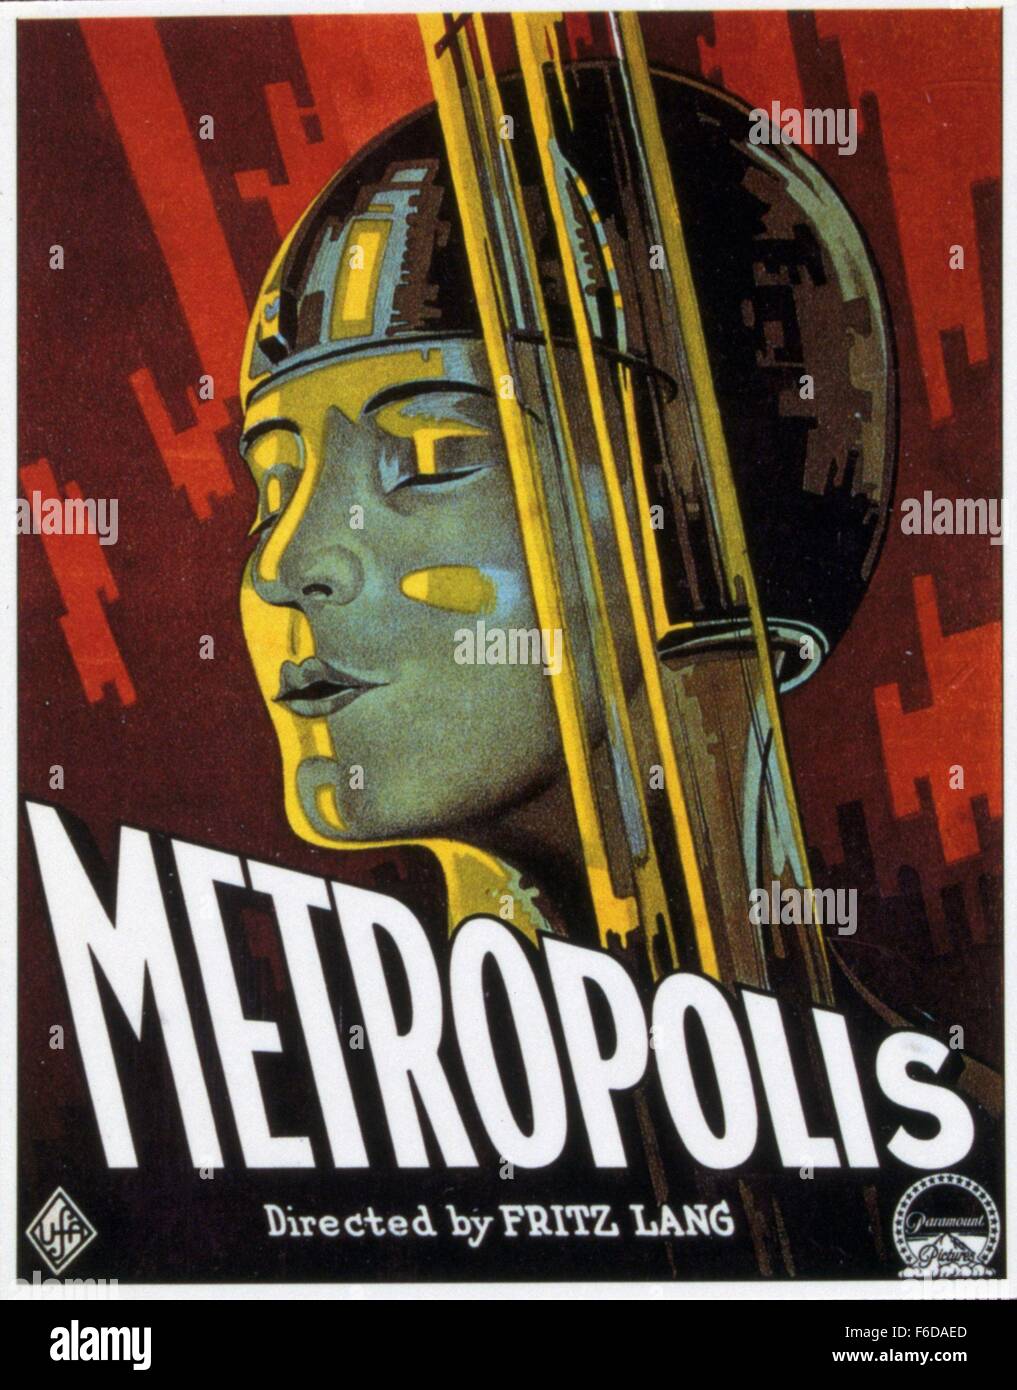 RELEASE DATE: March 13, 1927   MOVIE TITLE: Metropolis   STUDIO: Universal Film   DIRECTOR: Fritz Lang    PLOT: In a futuristic city sharply divided between the working class and the city planners, the son of the city's mastermind falls in love with a working class prophet who predicts the coming of a savior to mediate their differences. PICTURED: Brigitte Helm as Maria.   (Credit Image: c Universal Film/Entertainment Pictures) Stock Photo